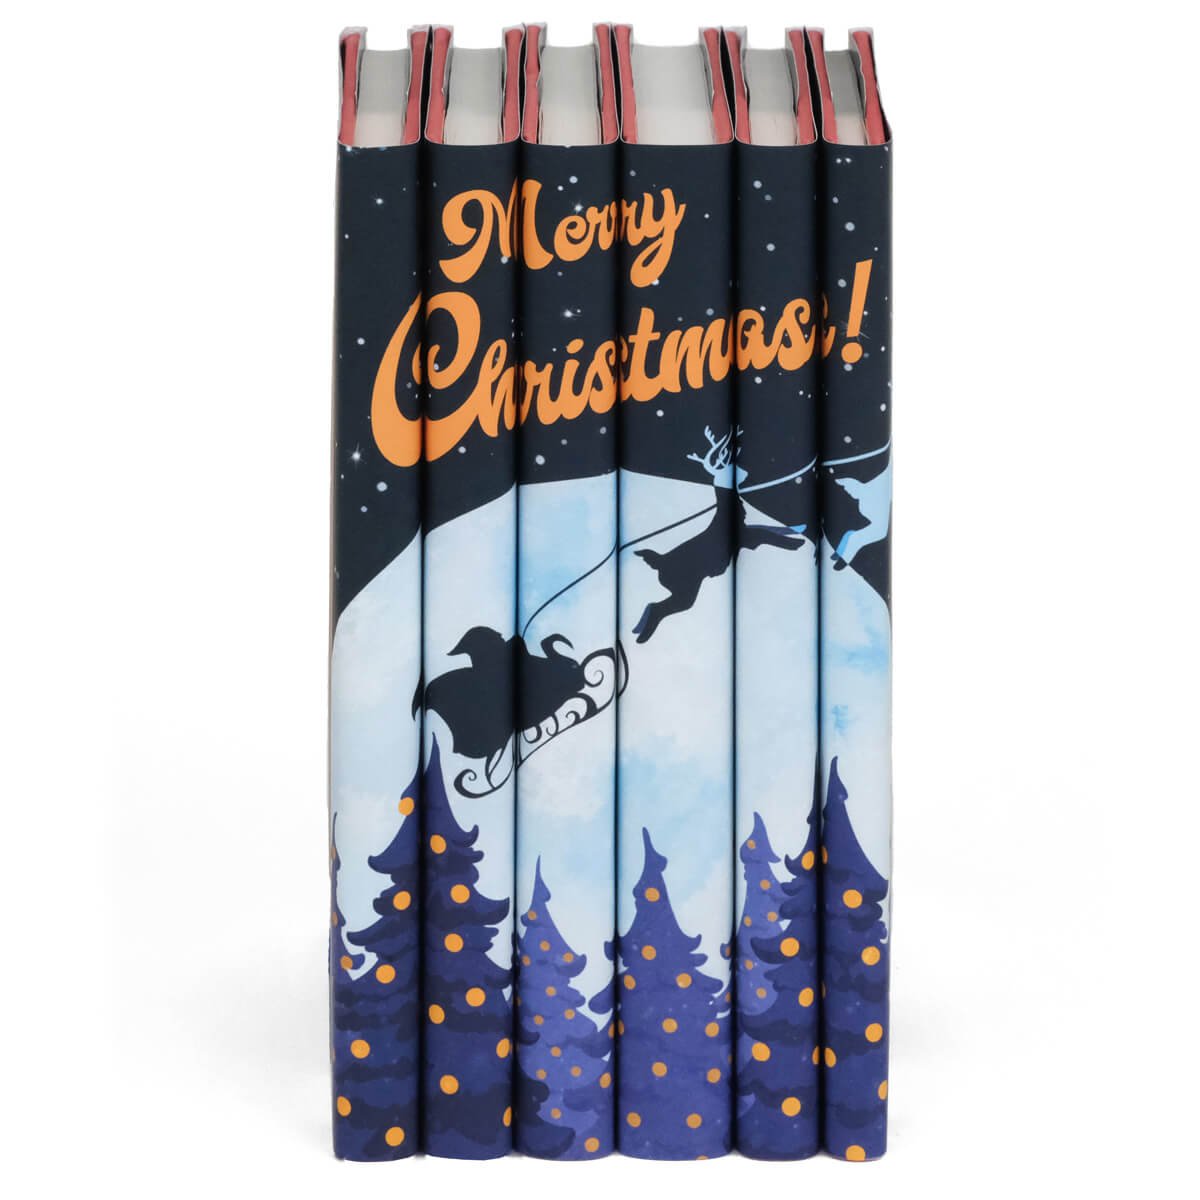 This festive set of novels is the perfect way to celebrate your favorite year-end traditions. Book Set, gift, trade, Christmas shopping. Merry Christmas written across spines above illustration of santa flying in his sleigh with his reindeer.